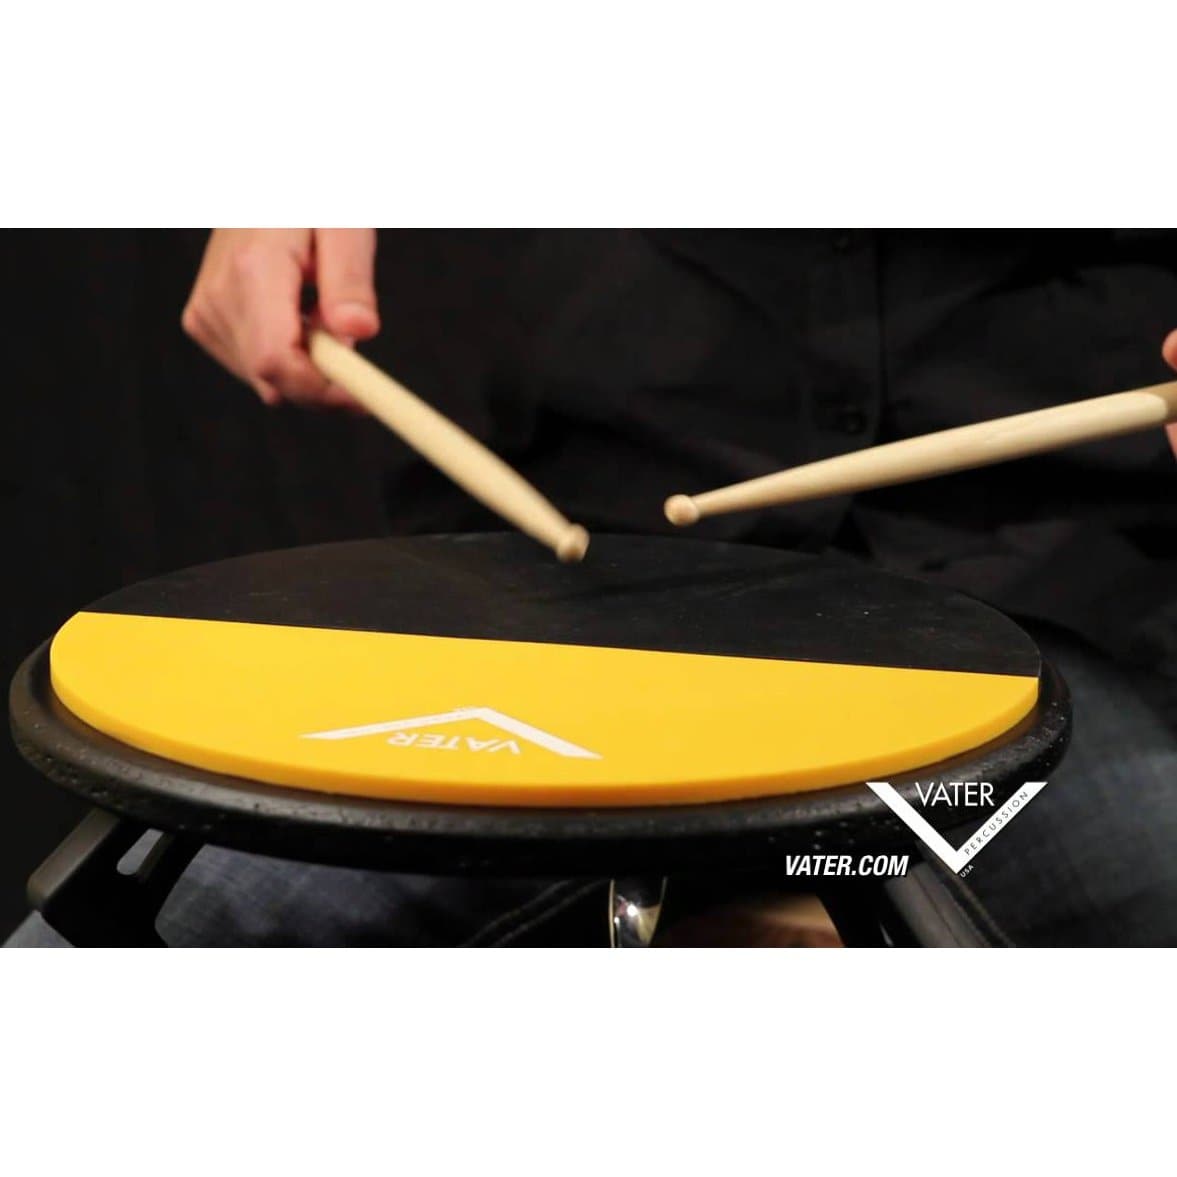 Vater Chop Builder Pad 12 Double Sided